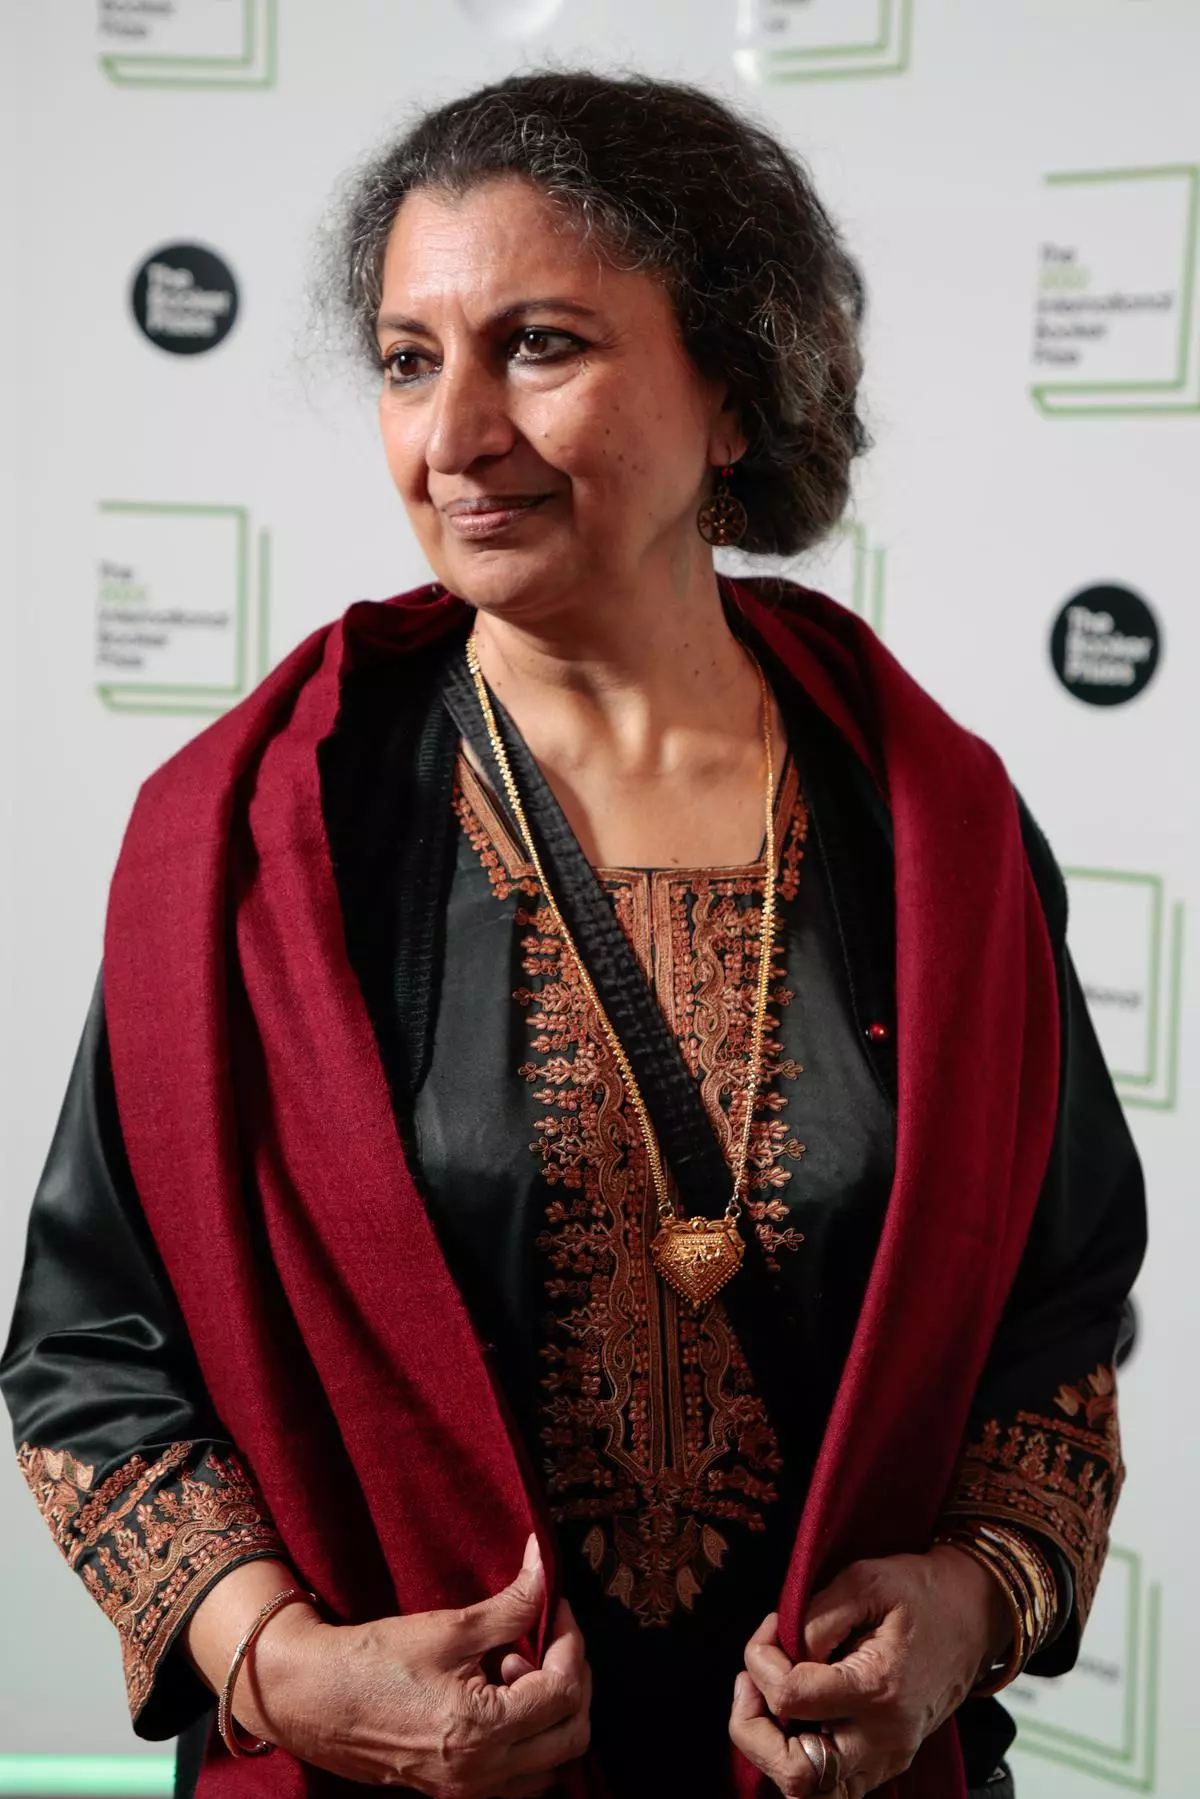 Geetanjali Shree at The 2022 International Booker Prize Winner Ceremony at One Marylebone on May 26, 2022 in London